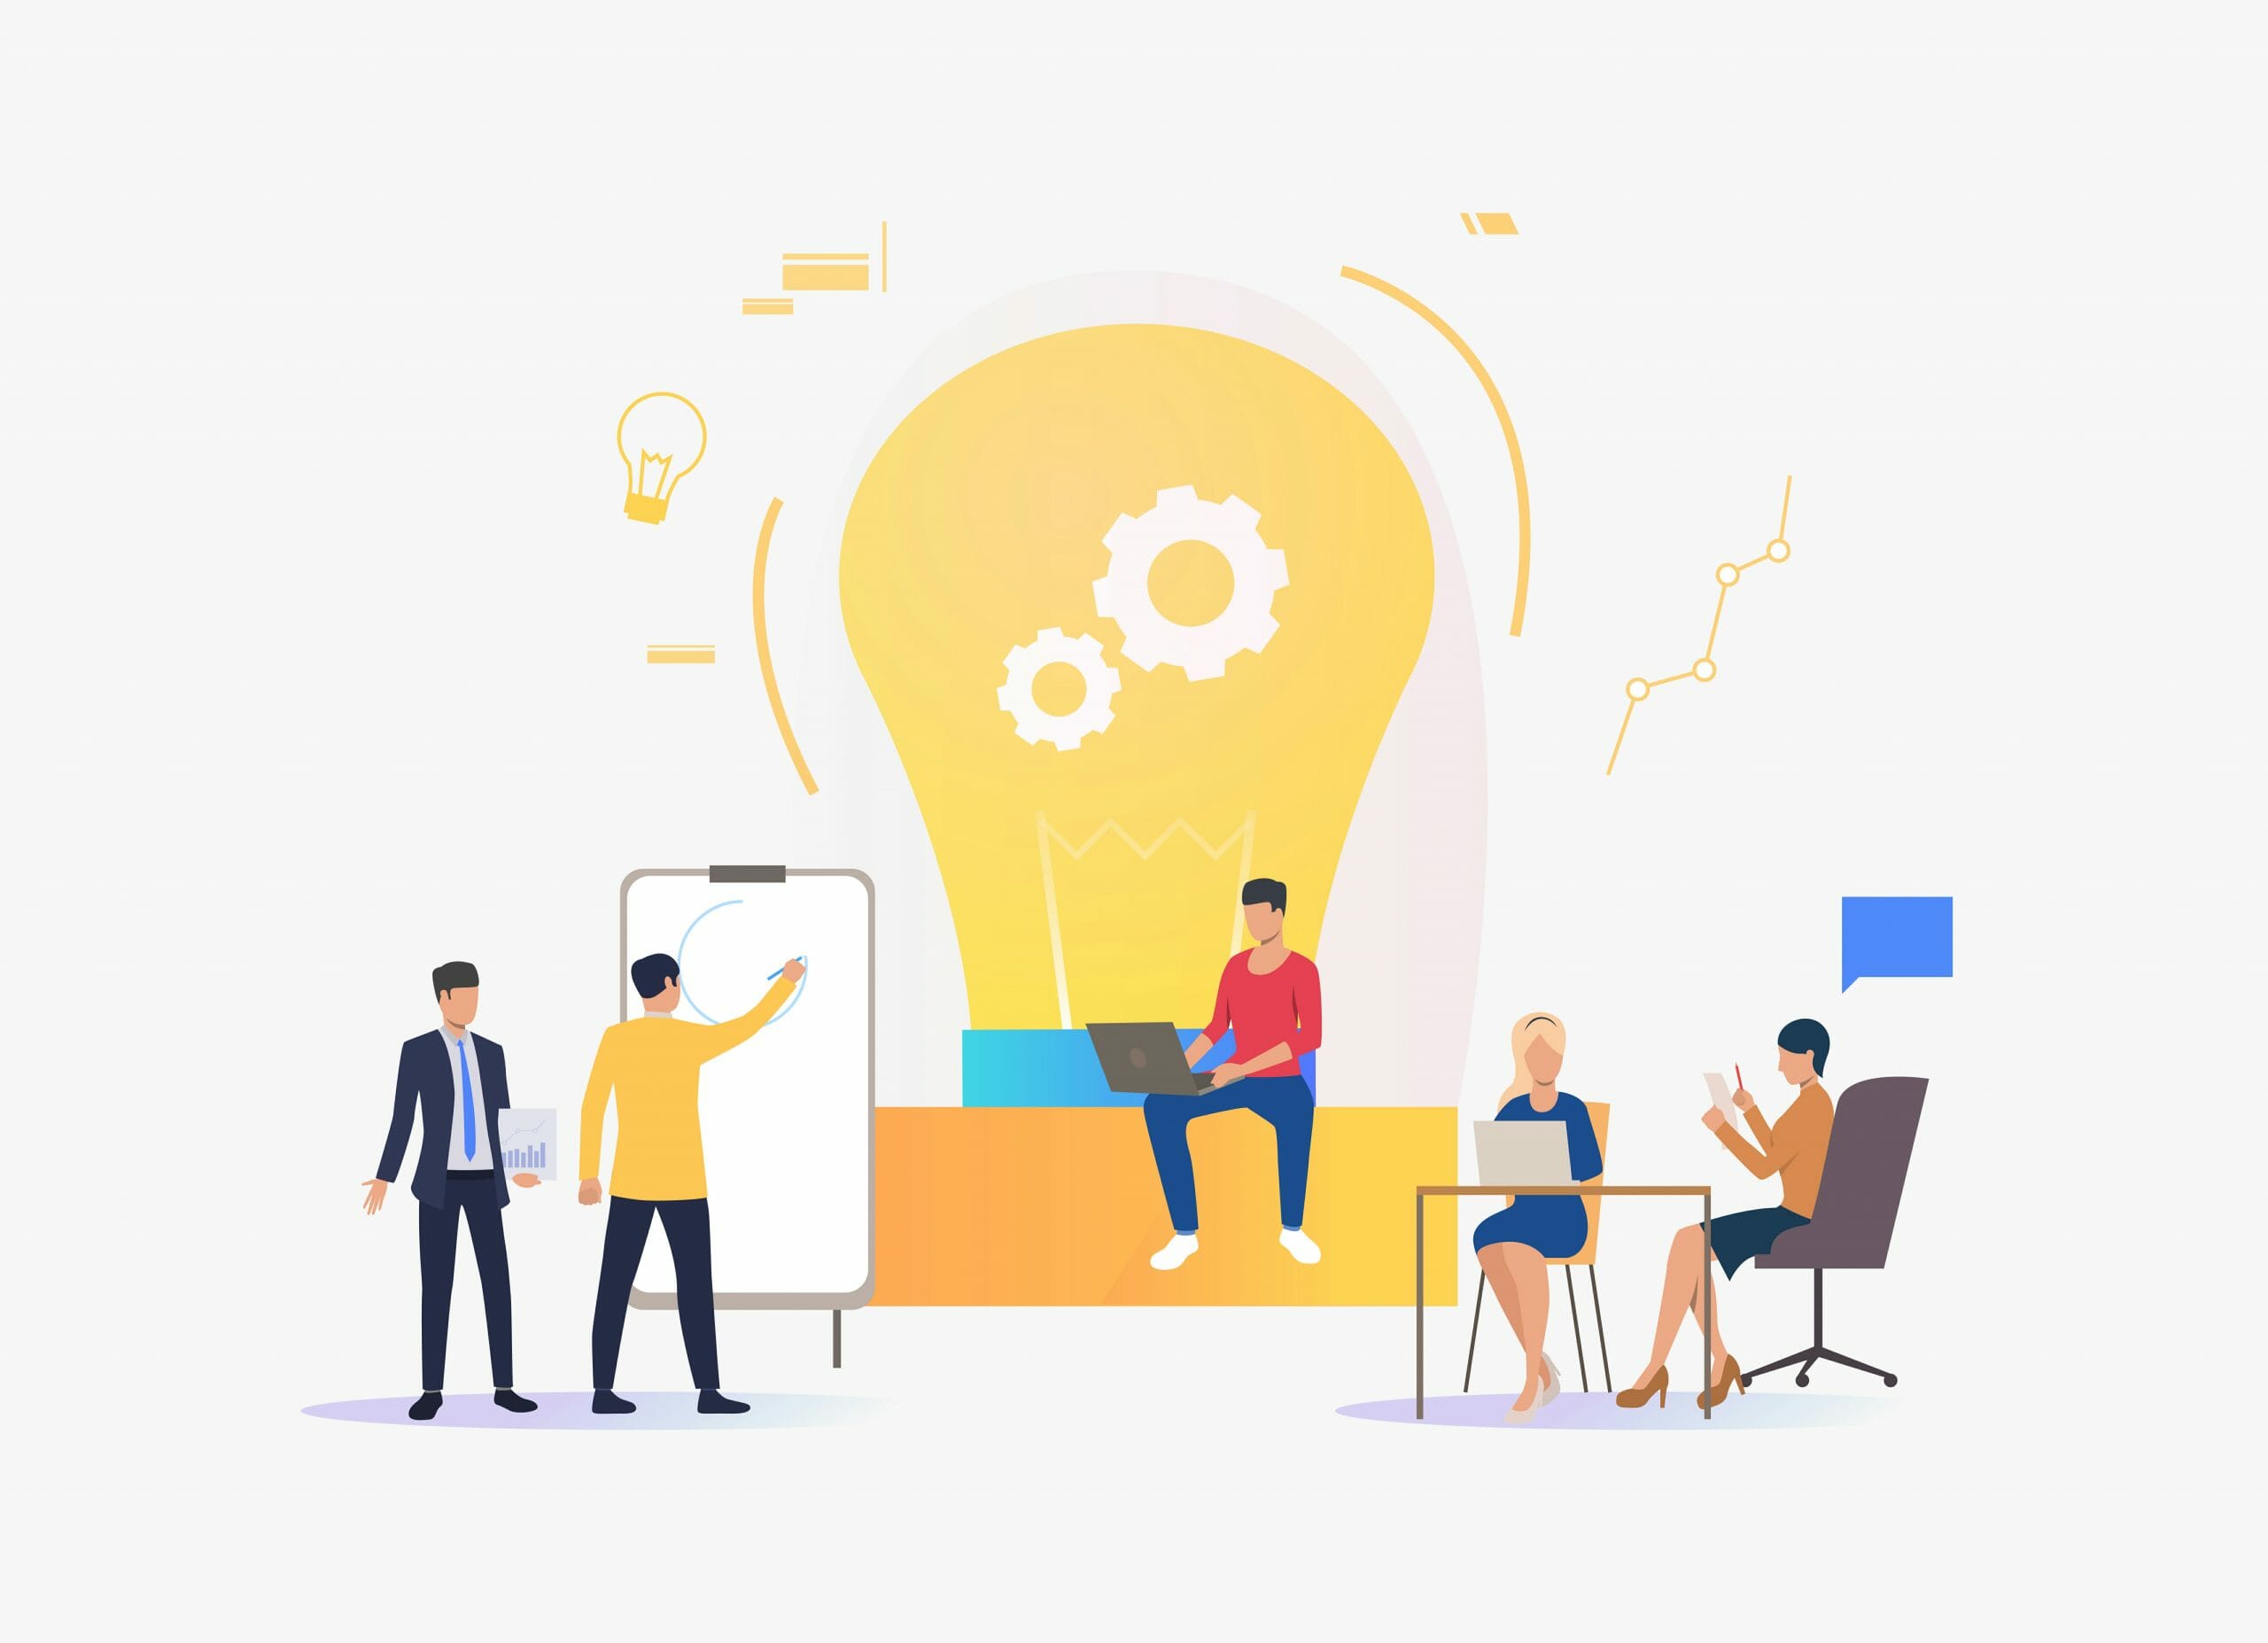 Light bulb, people discussing ideas and working. Innovation, study, work concept. Vector illustration can be used for topics like business, education, research